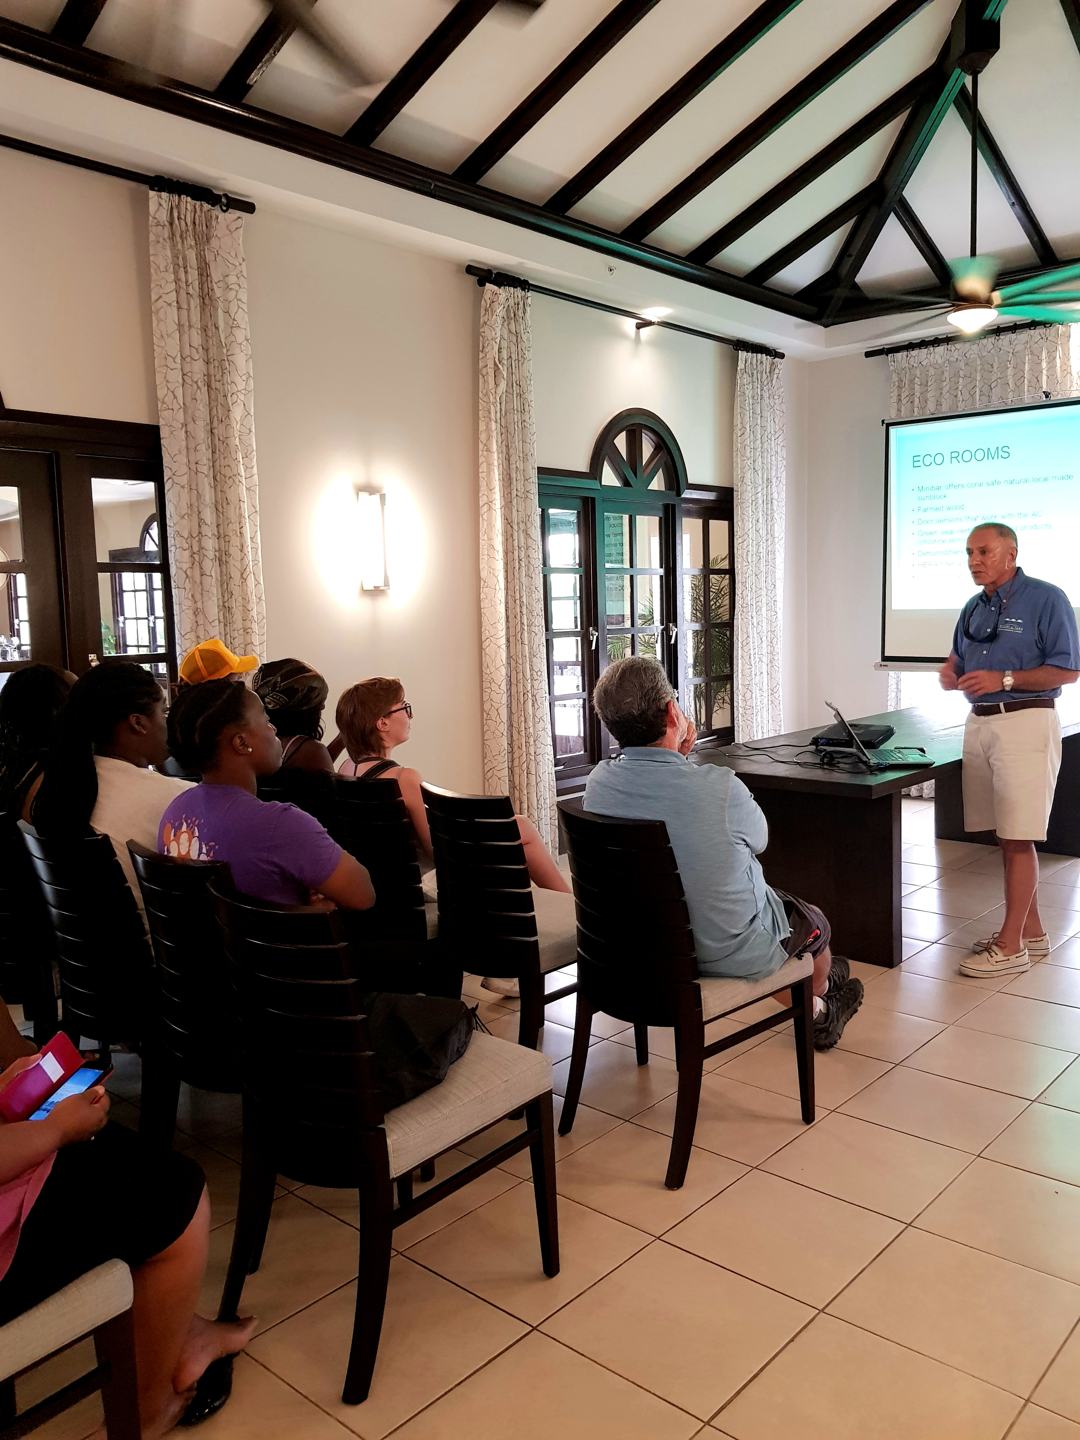 Professors and students of Mercer University in Georgia, U.S., learn sustainability best practices within the business setting from Ewald Biemans, owner/CEO of Bucuti & Tara Beach Resort and noted environmentalist